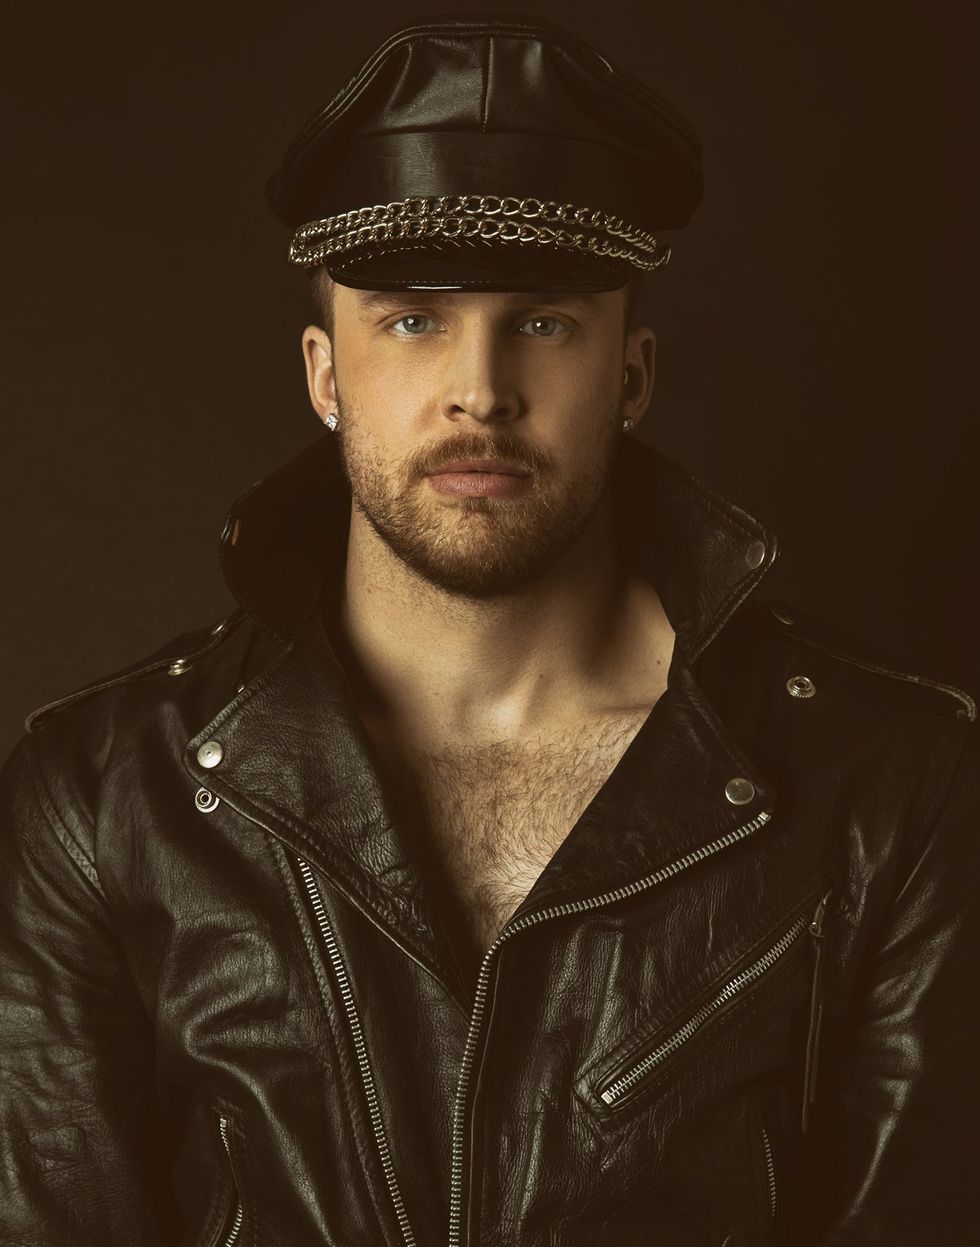 Photo Gallery Q&A: Meet NYC based gay celebrity photographer Mike Ruiz and his LGBTQ+ subjects Leatherman Carson Tueller